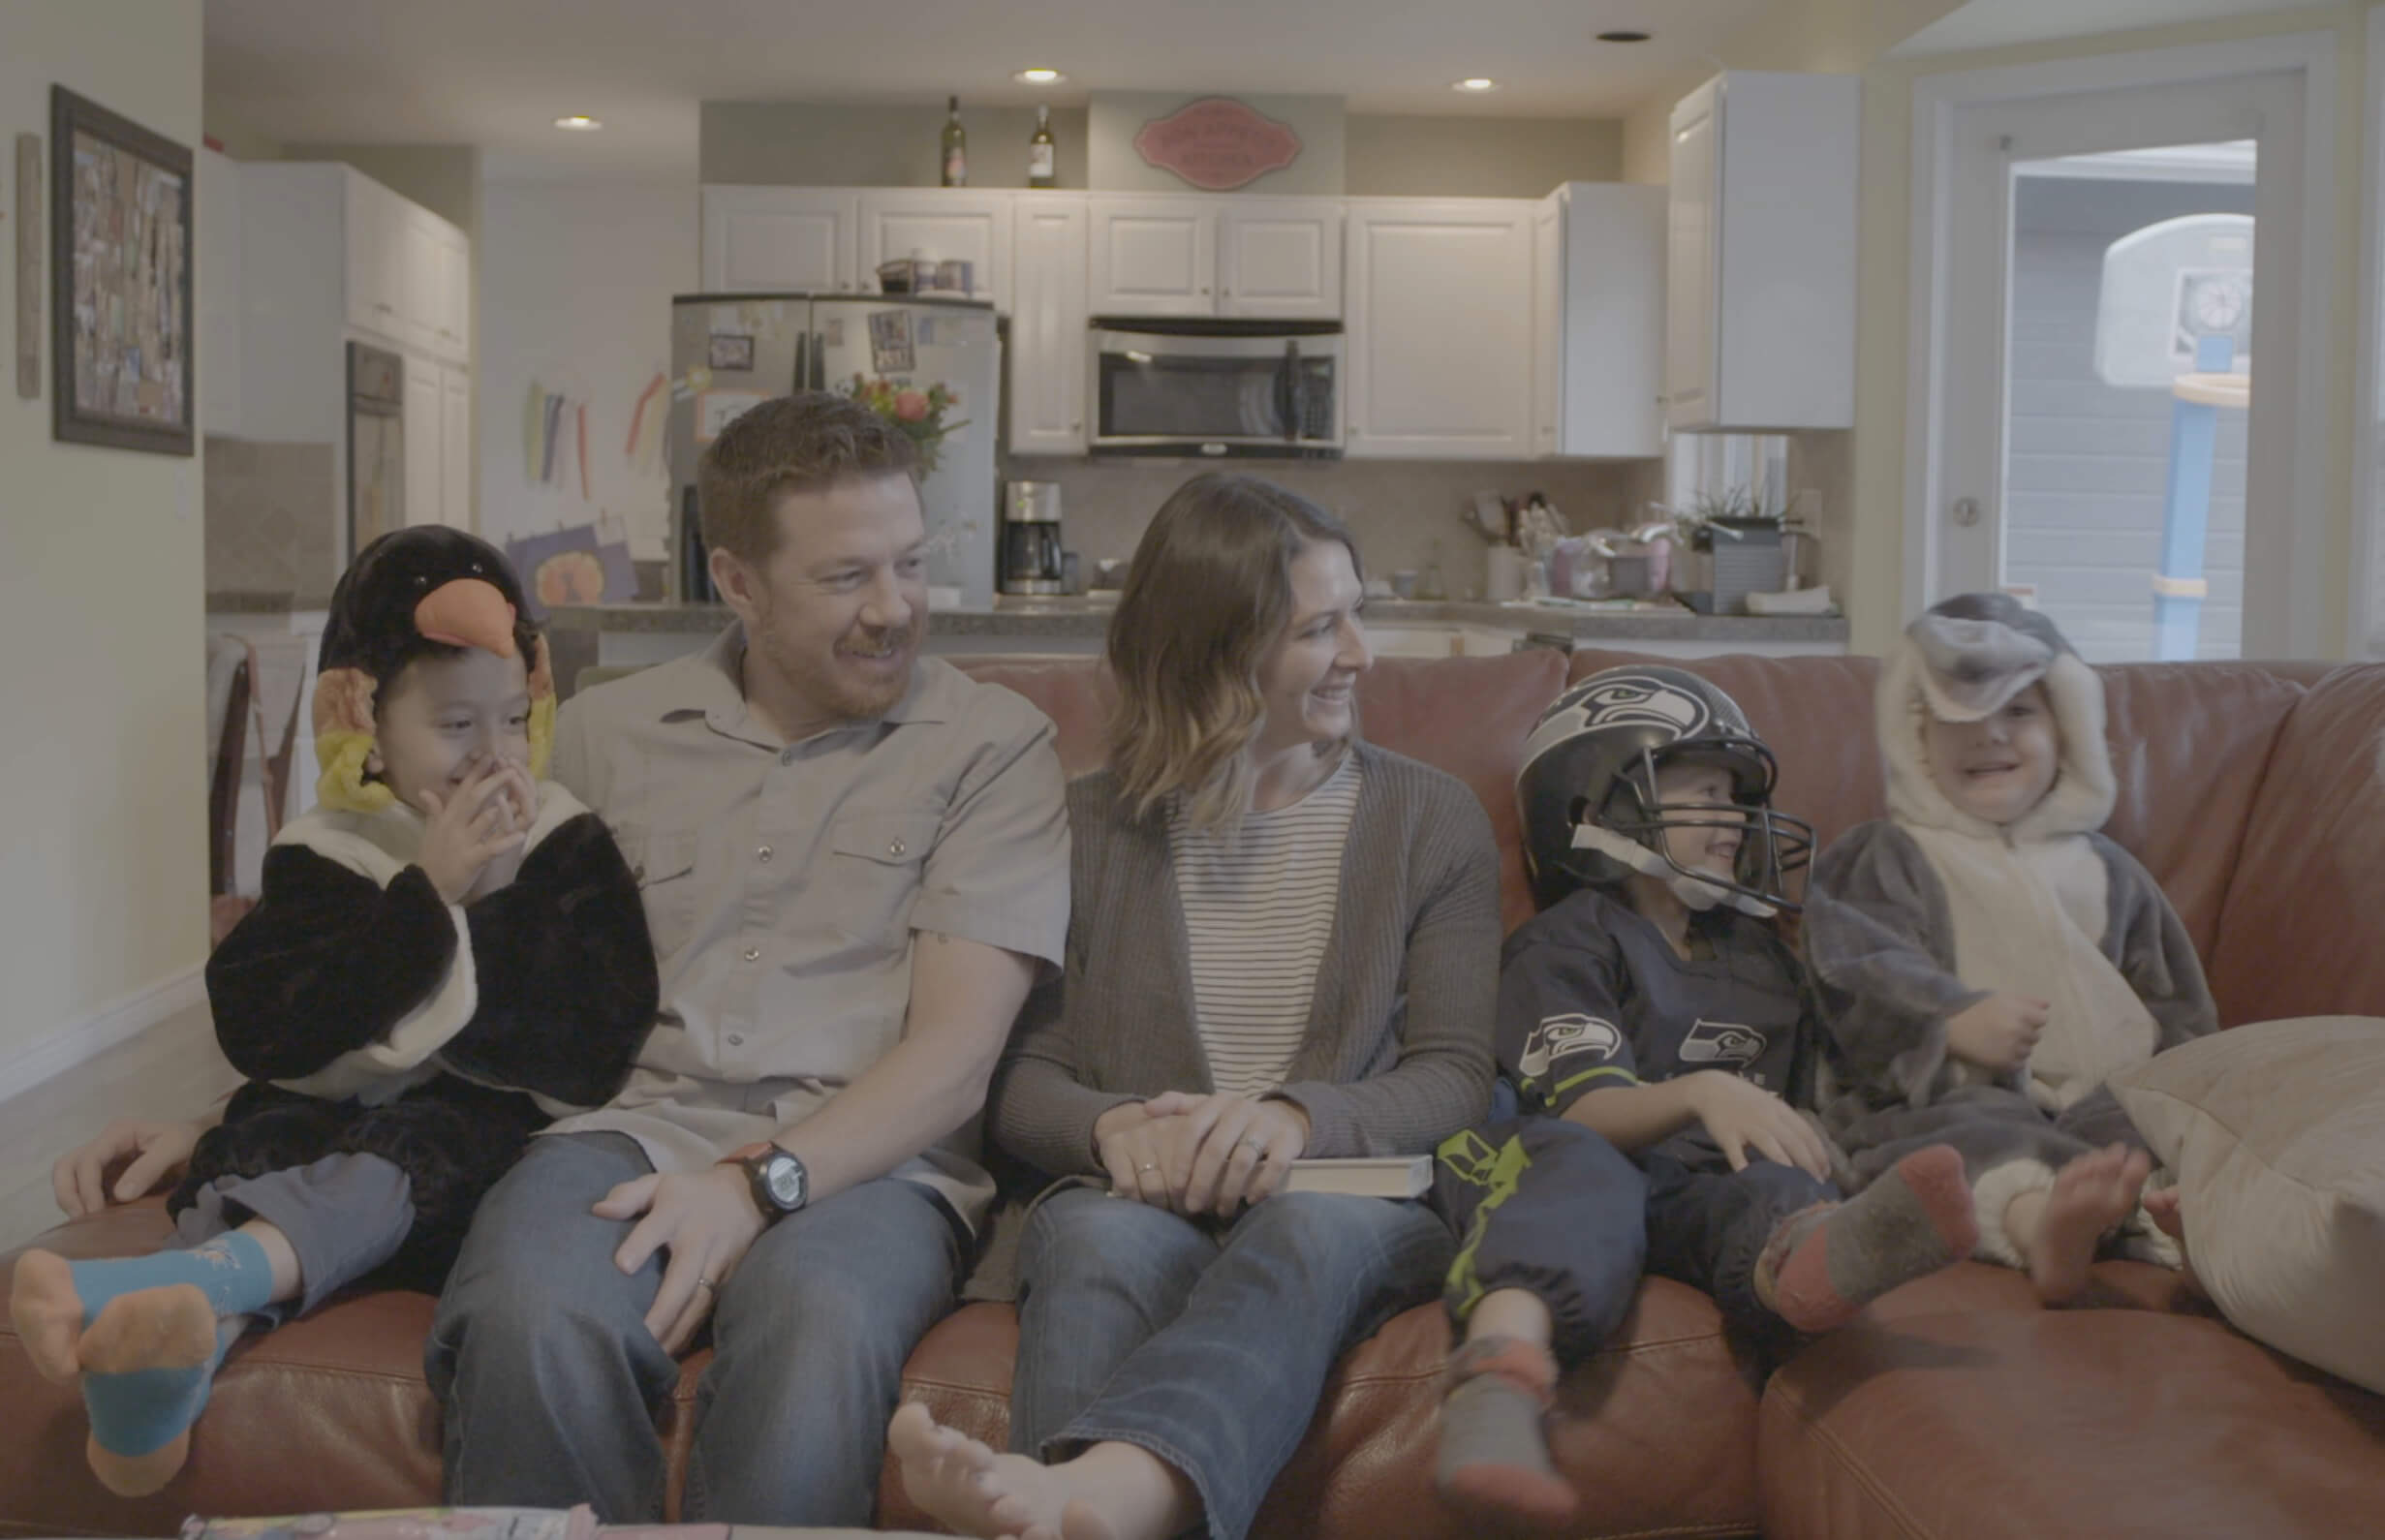 Still from Made in Boise. A man, woman, and three children in costumes sit on a couch, smiling. There is an out of focus kitchen in the background.